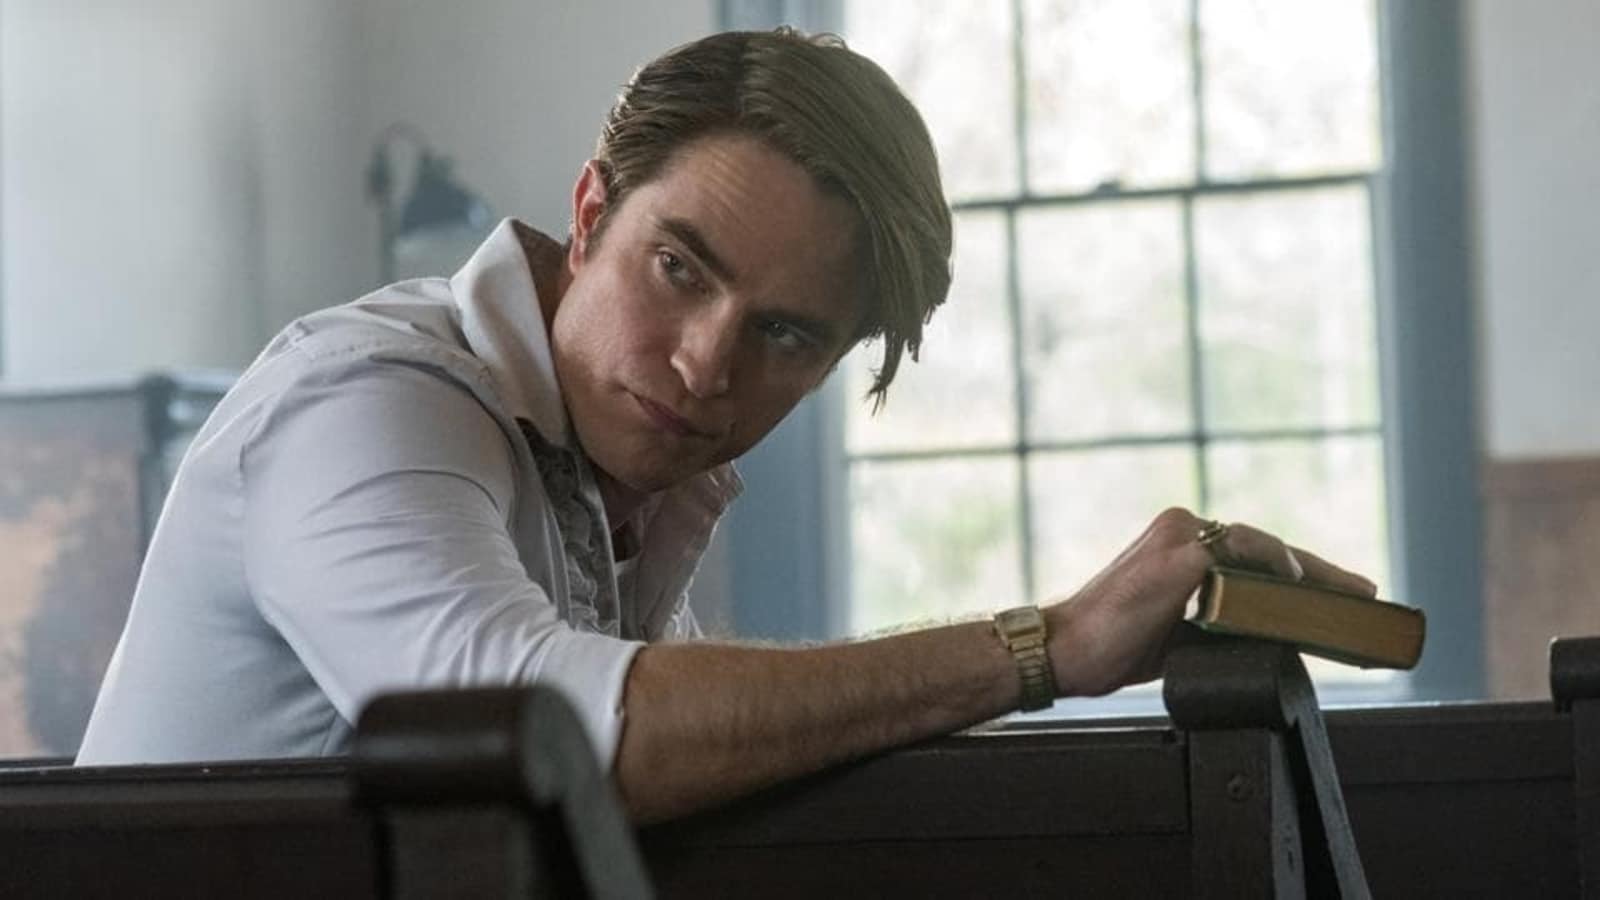 Robert Pattinson speaks up on ‘insidious’ body standards for men in Hollywood: ‘Ate nothing but potatoes for two weeks’